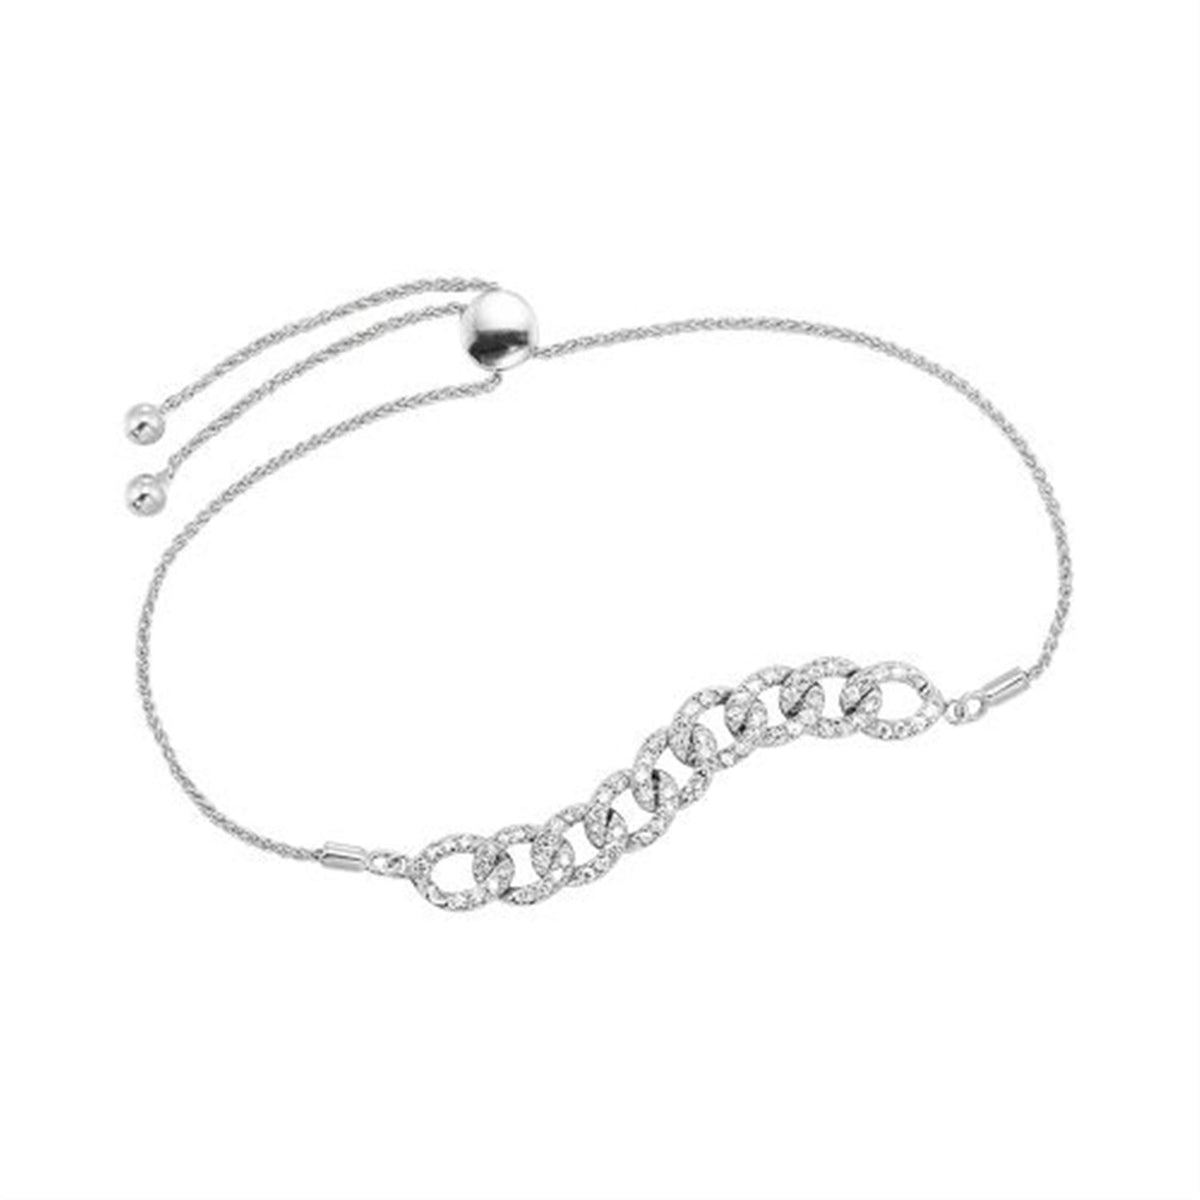 10Kt White Gold Curb Link Bracelet With 0.62cttw Natural Diamonds